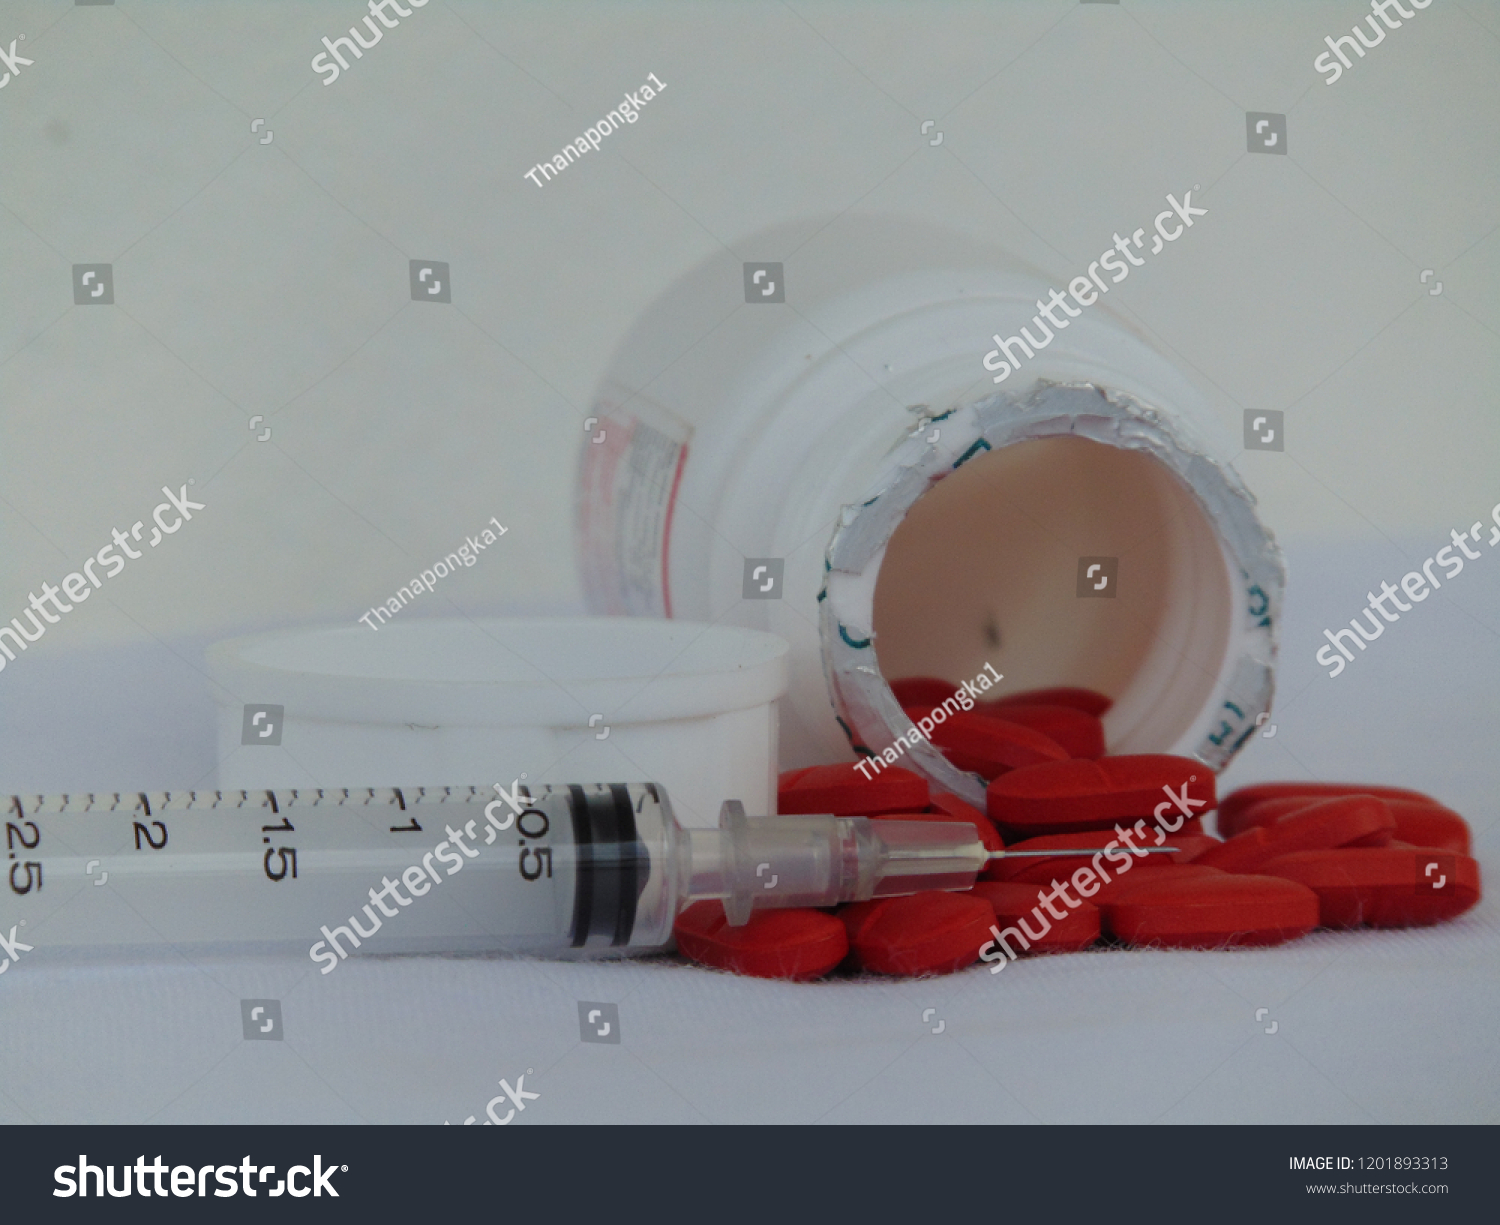 Syringes,medications and thermometer. #1201893313